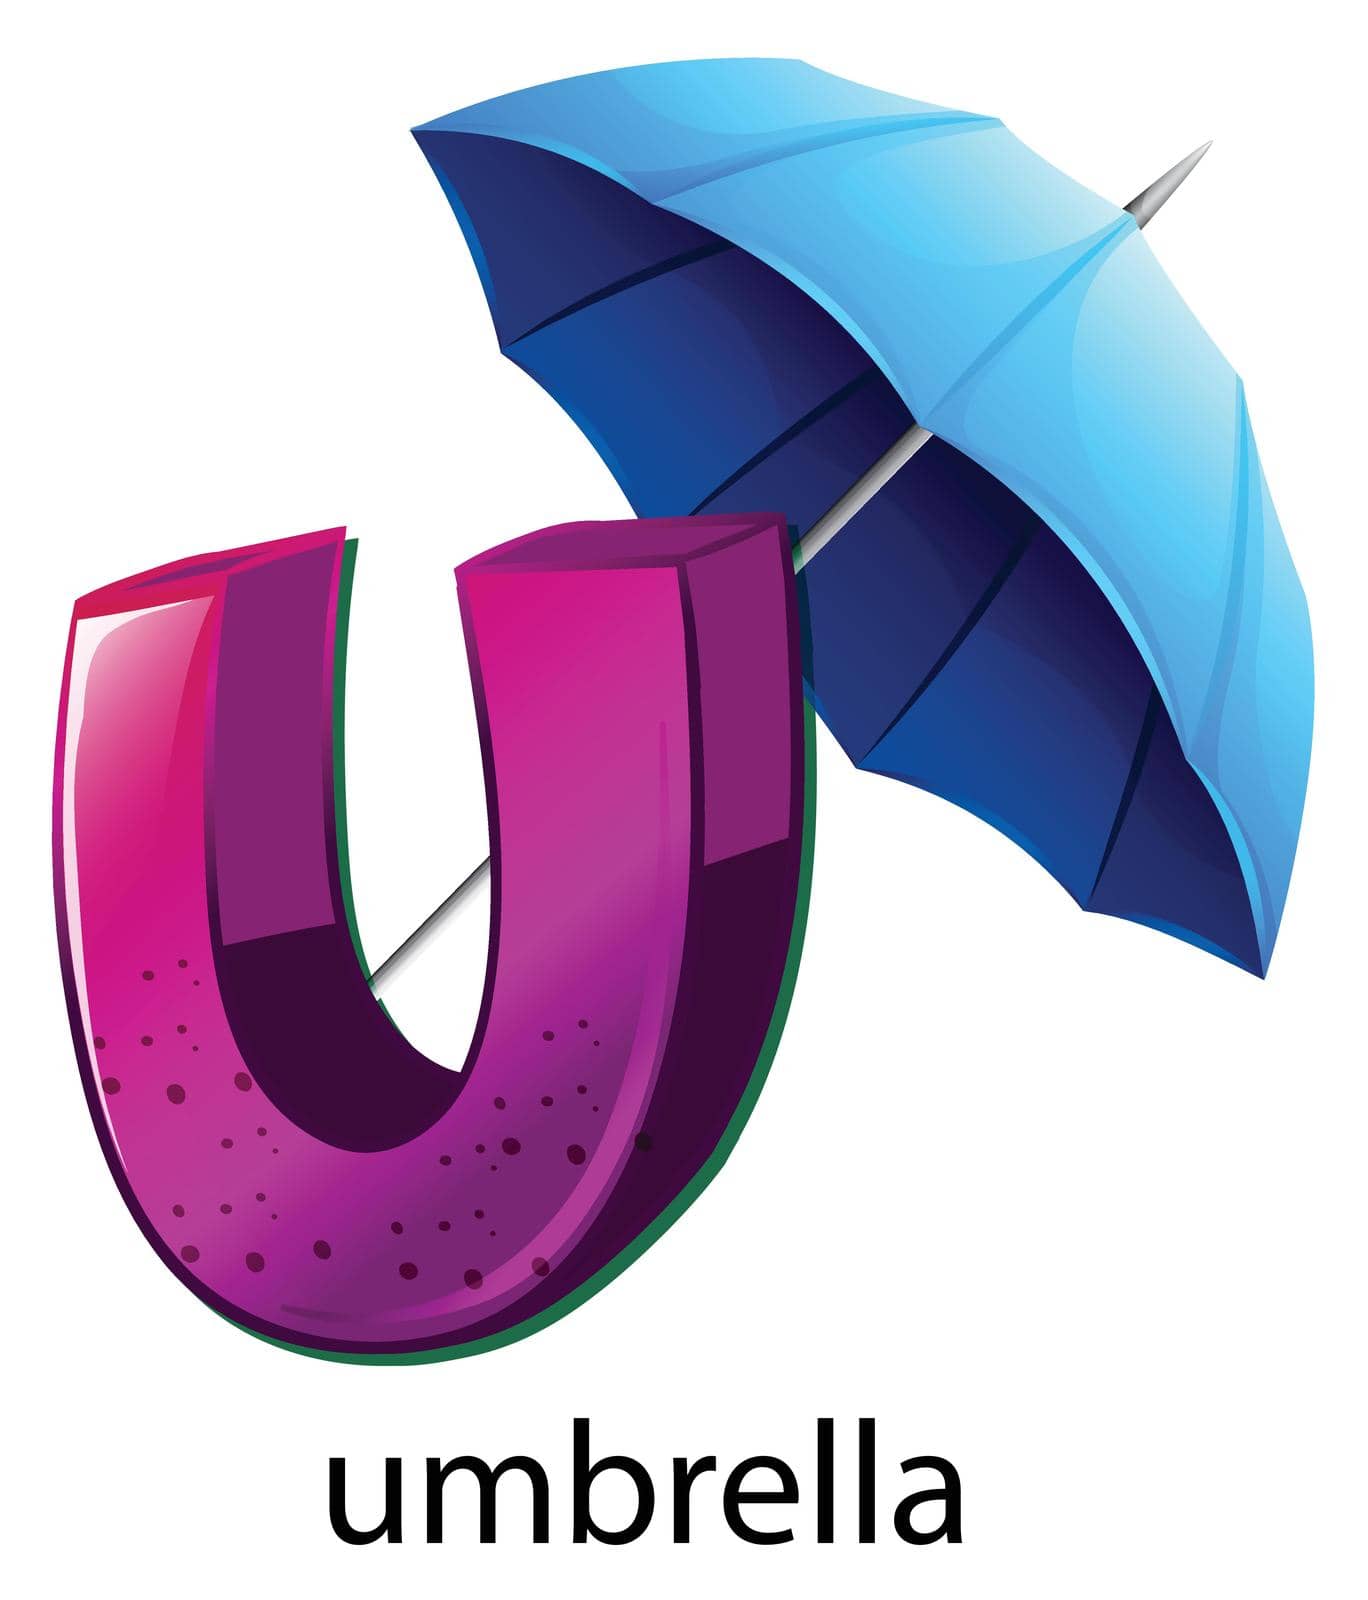 A letter U for umbrella by iimages